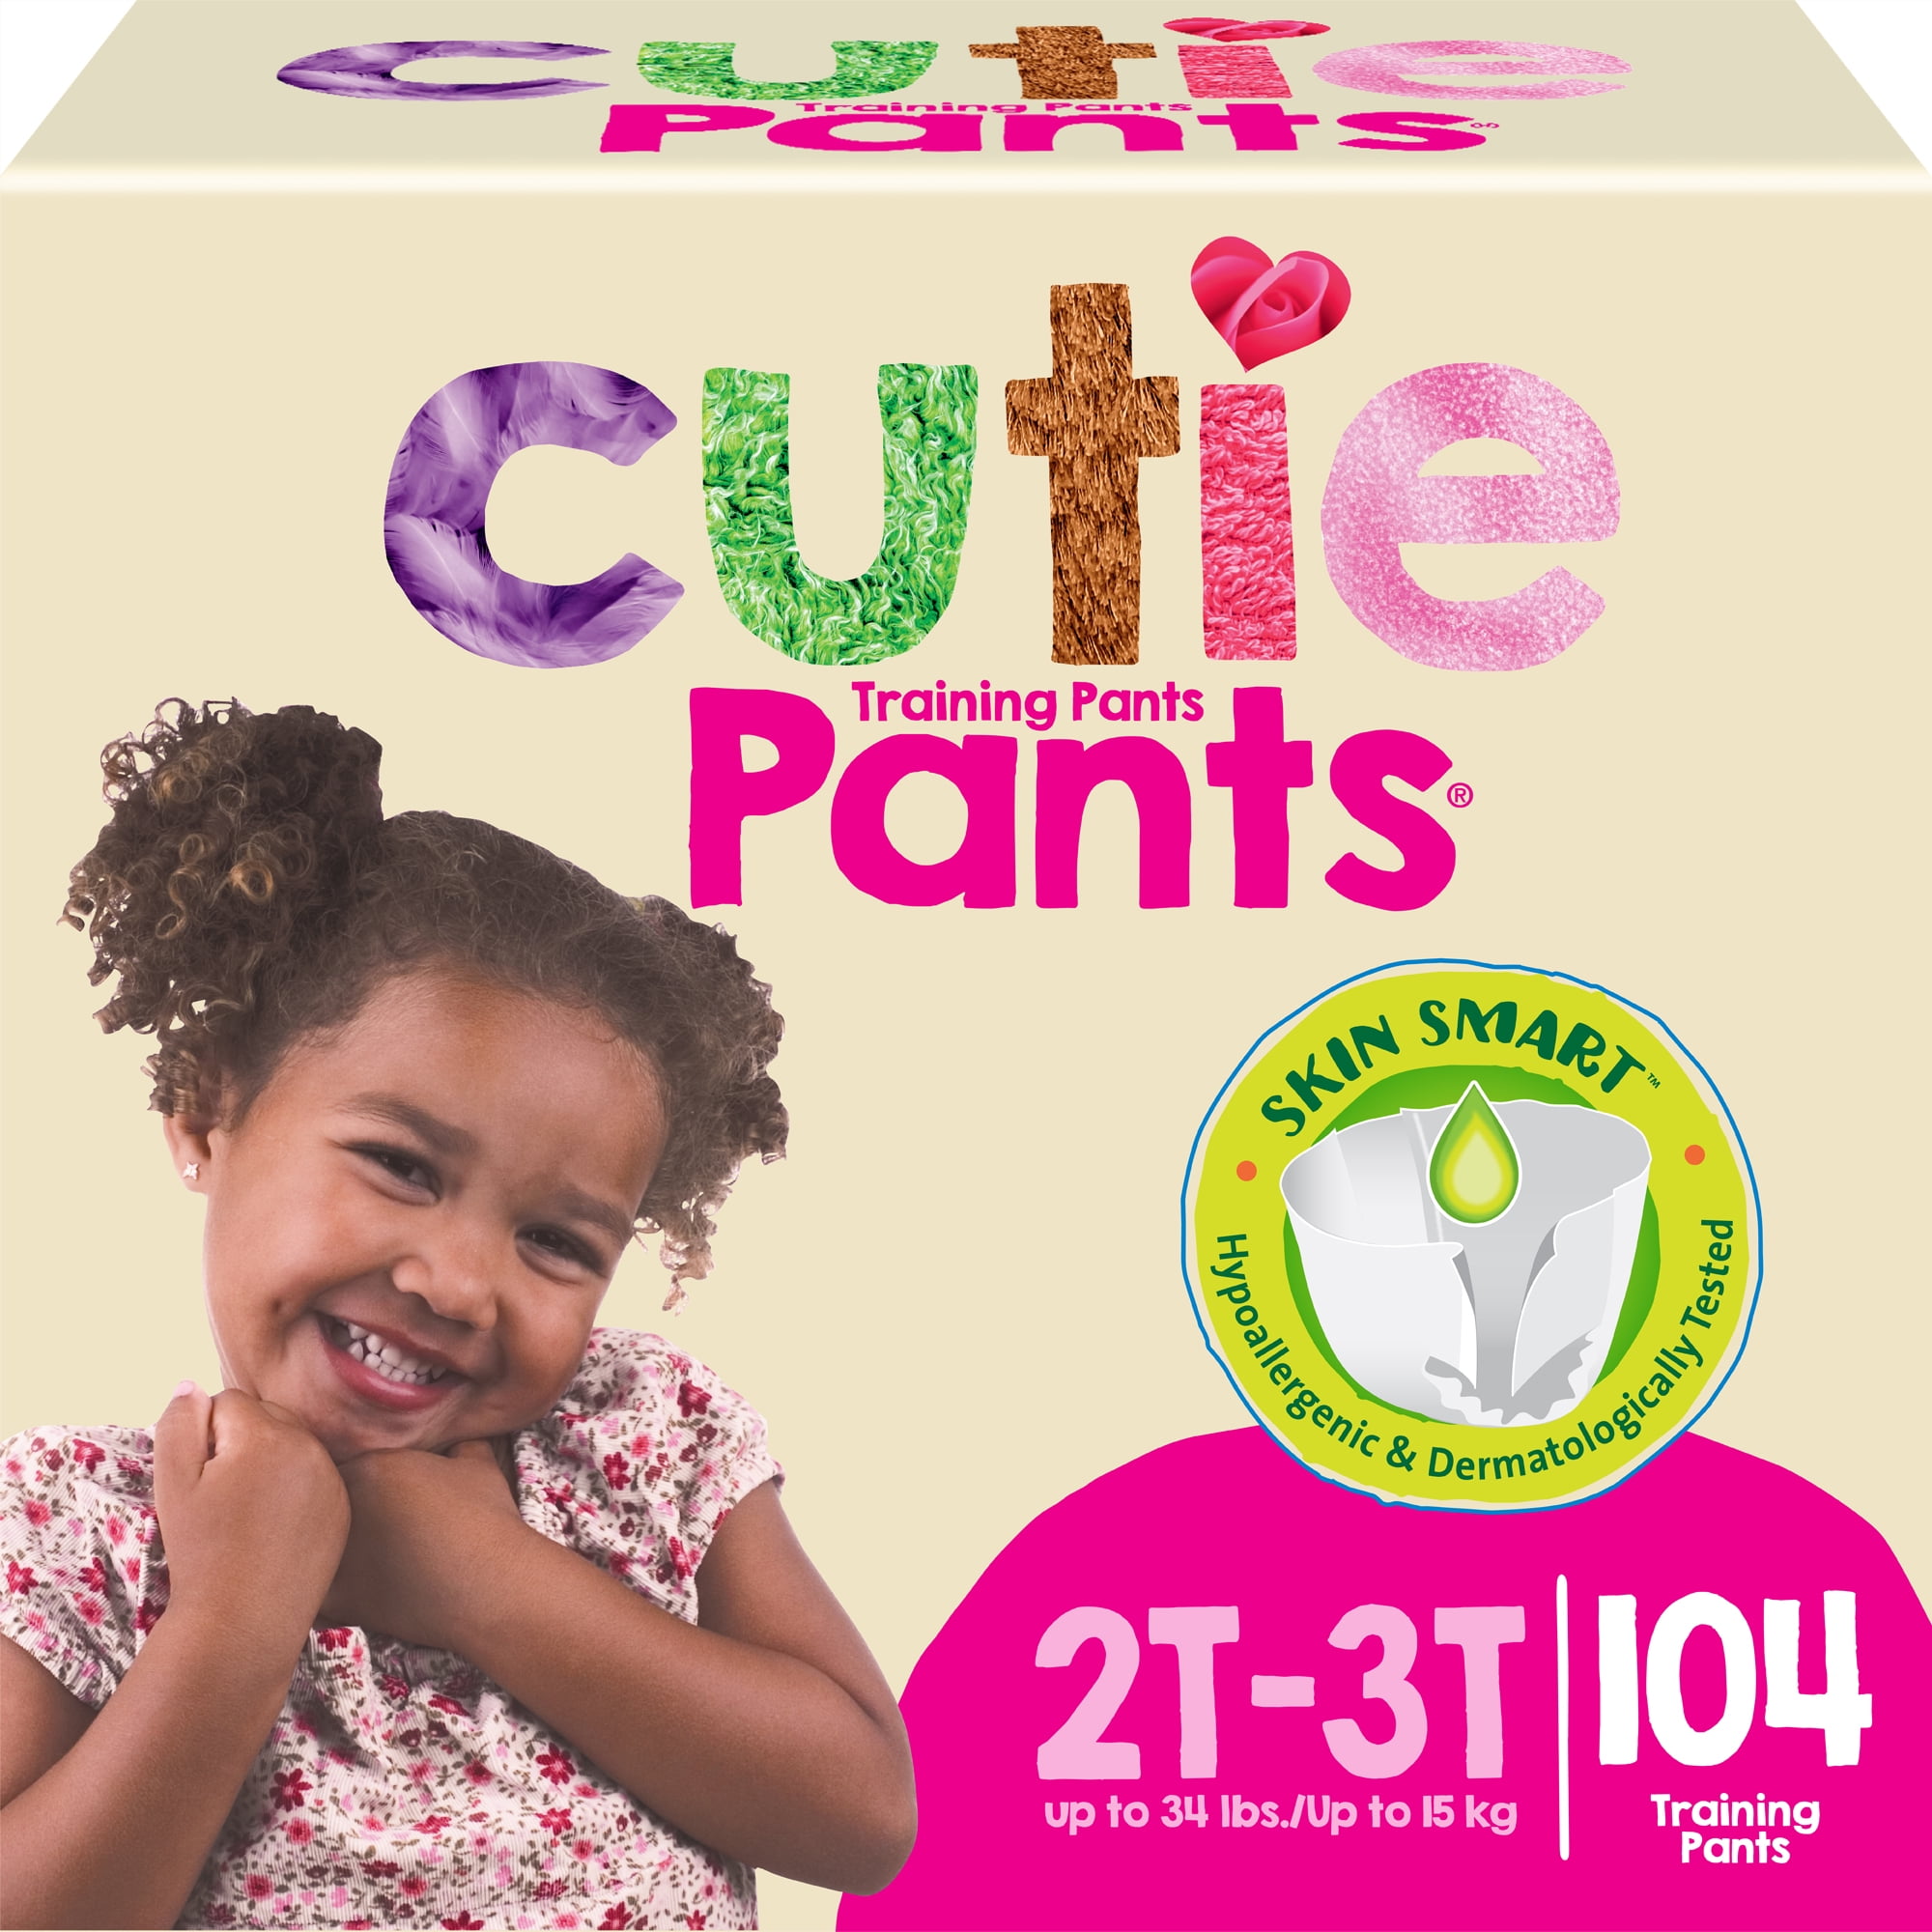  Cutie Boys 4T/5T Refastenable Potty Training Pants,  Hypoallergenic with Skin Smart, 76 Count White : Baby